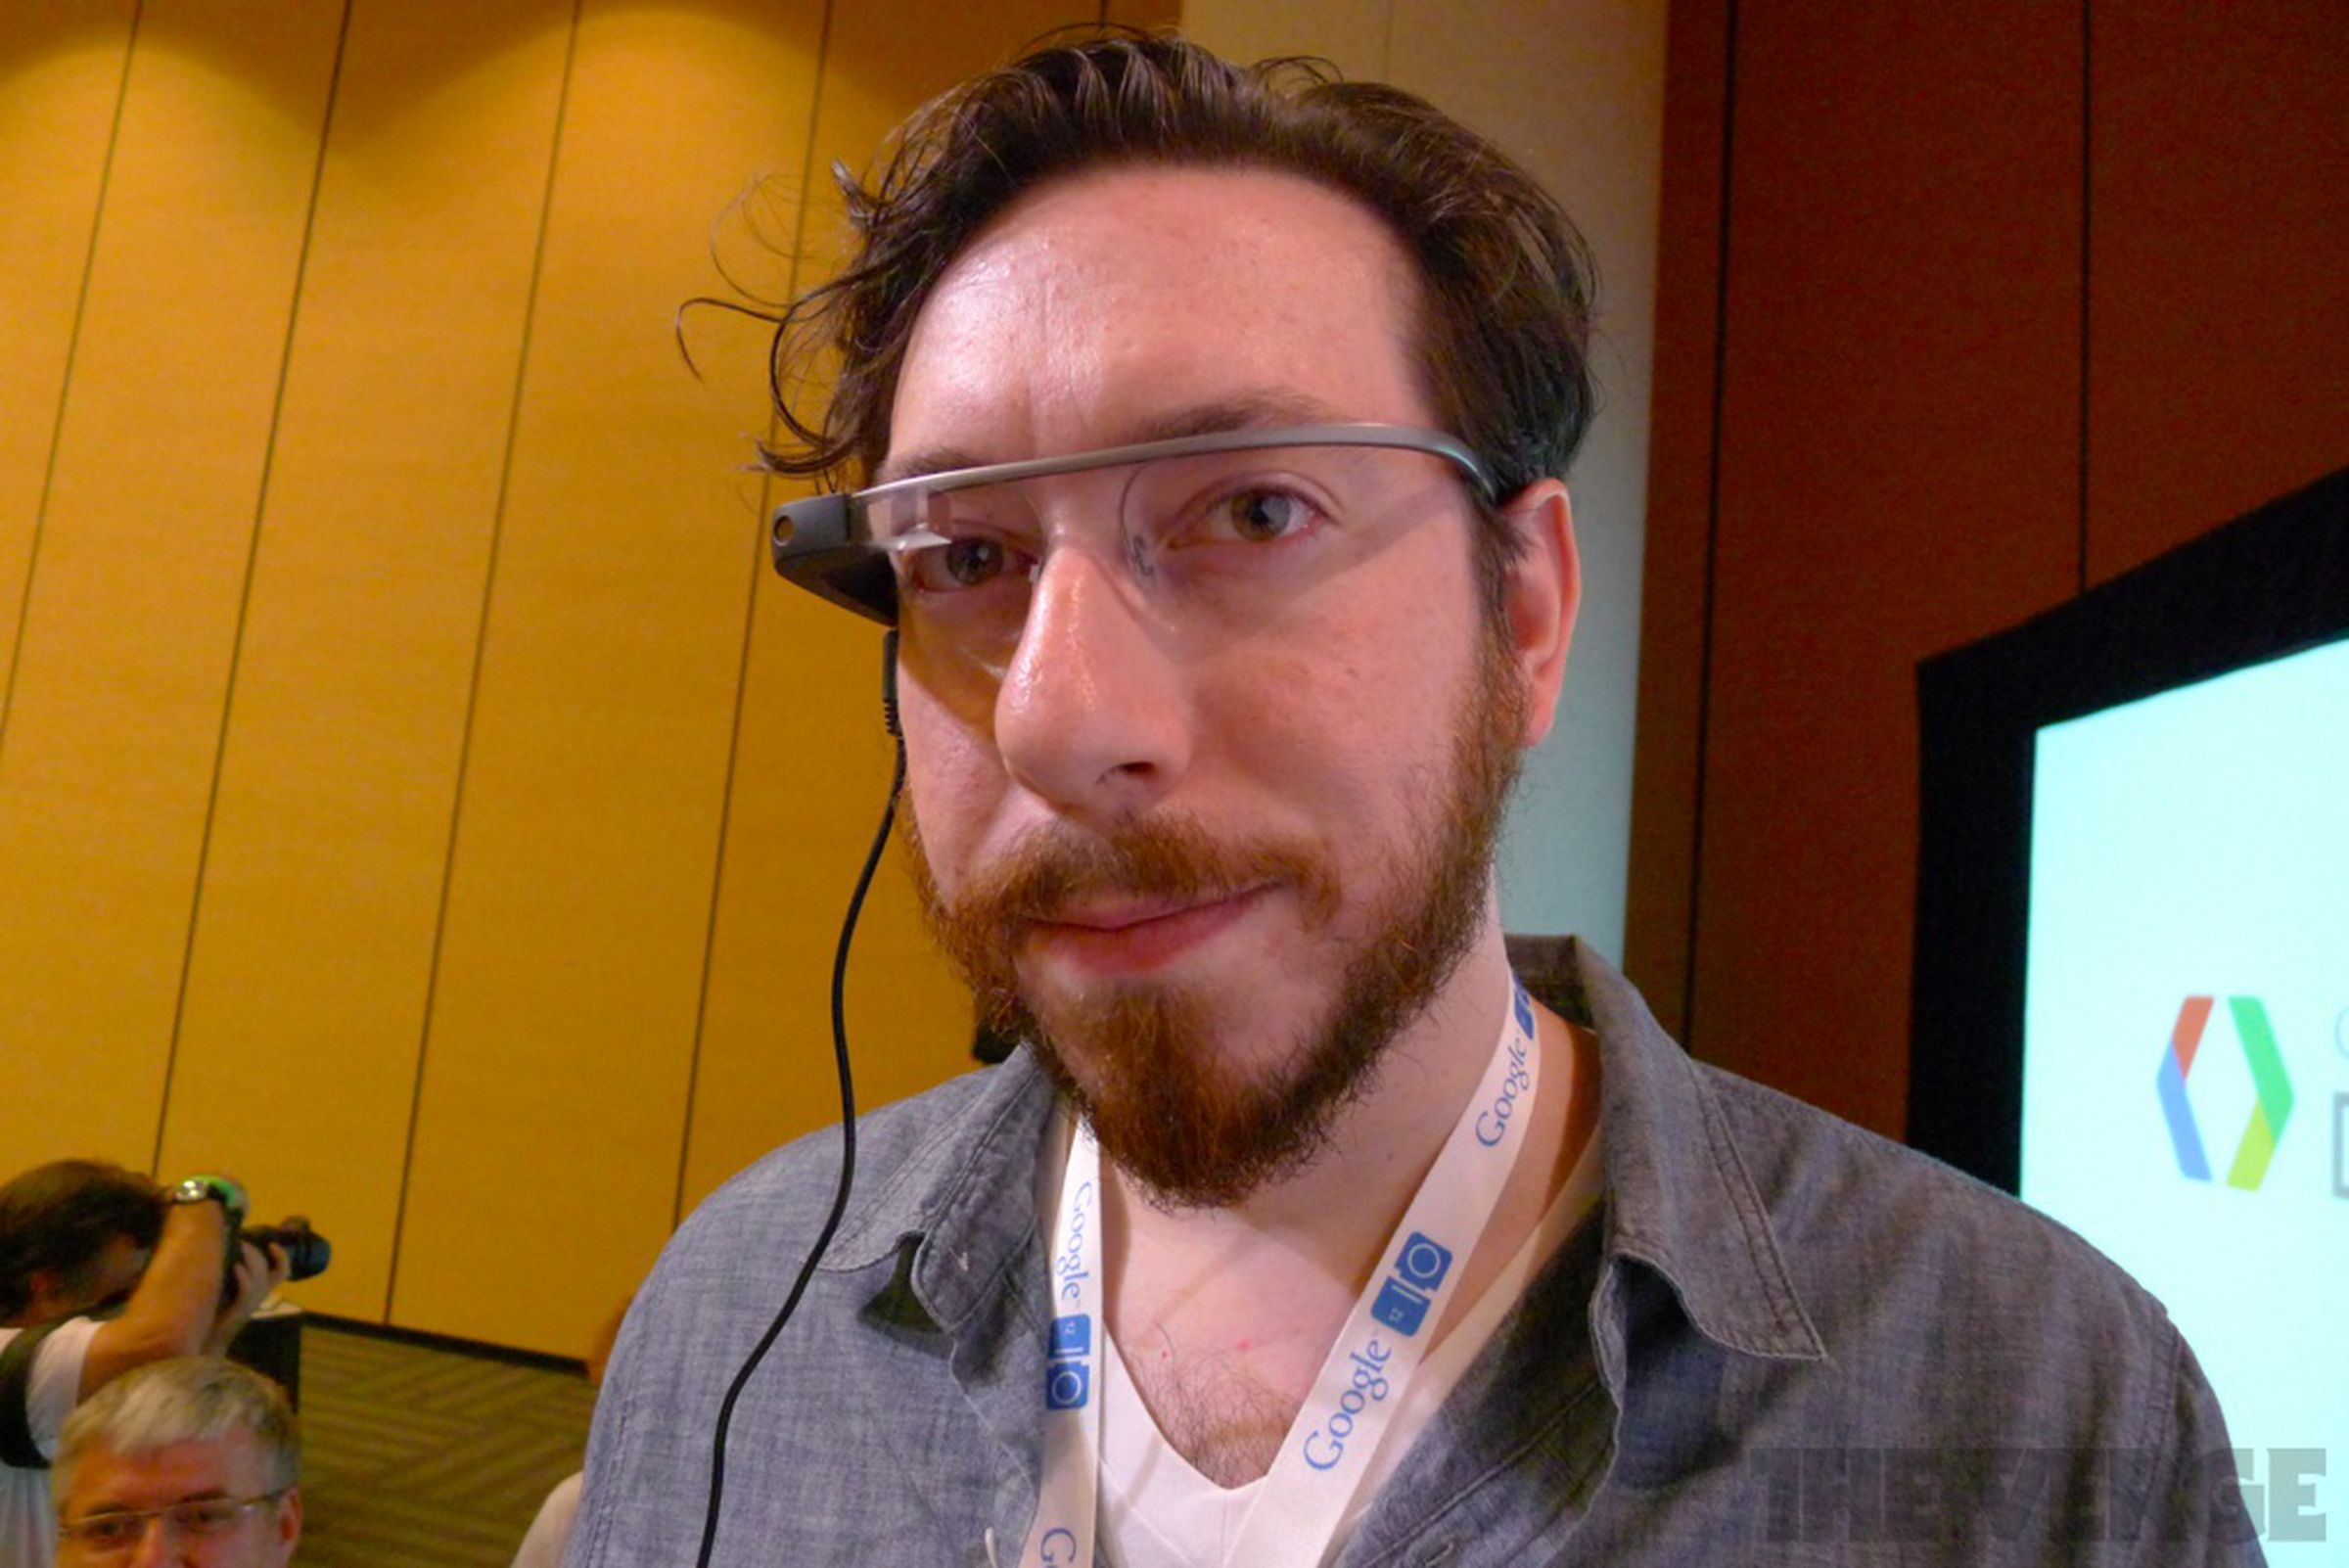 Trying out Sergey Brin's Glasses